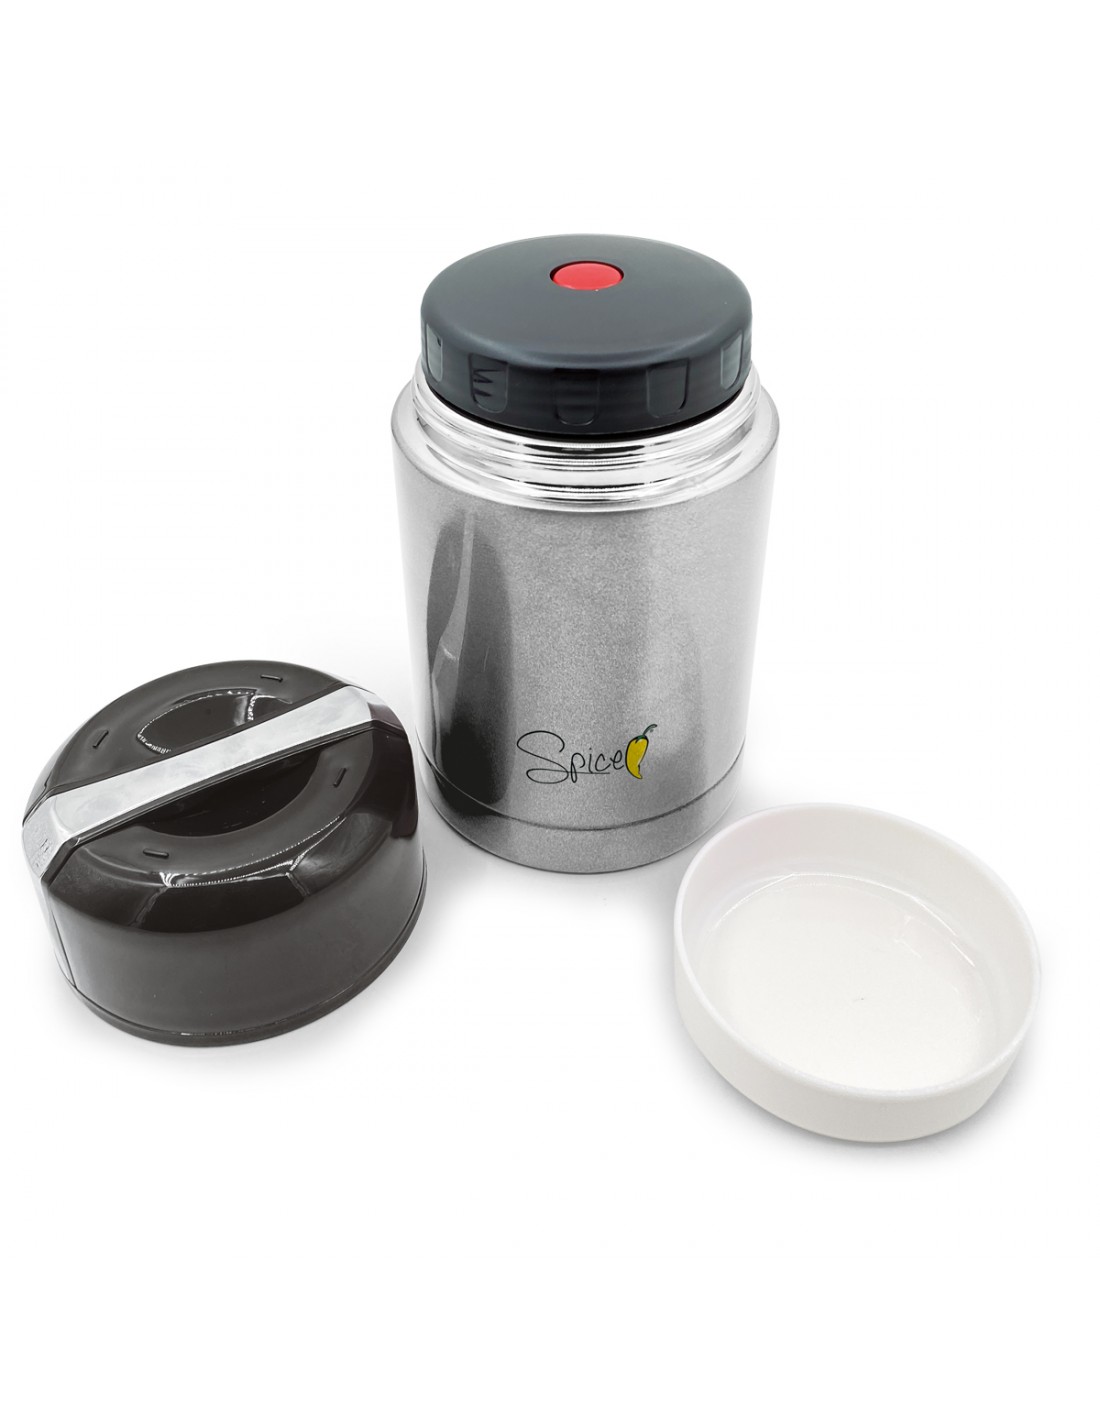 https://www.spice-electronics.com/3185-thickbox_default/thermos-set-thermal-food-container-1l-3-stainless-steel-cutlery.jpg